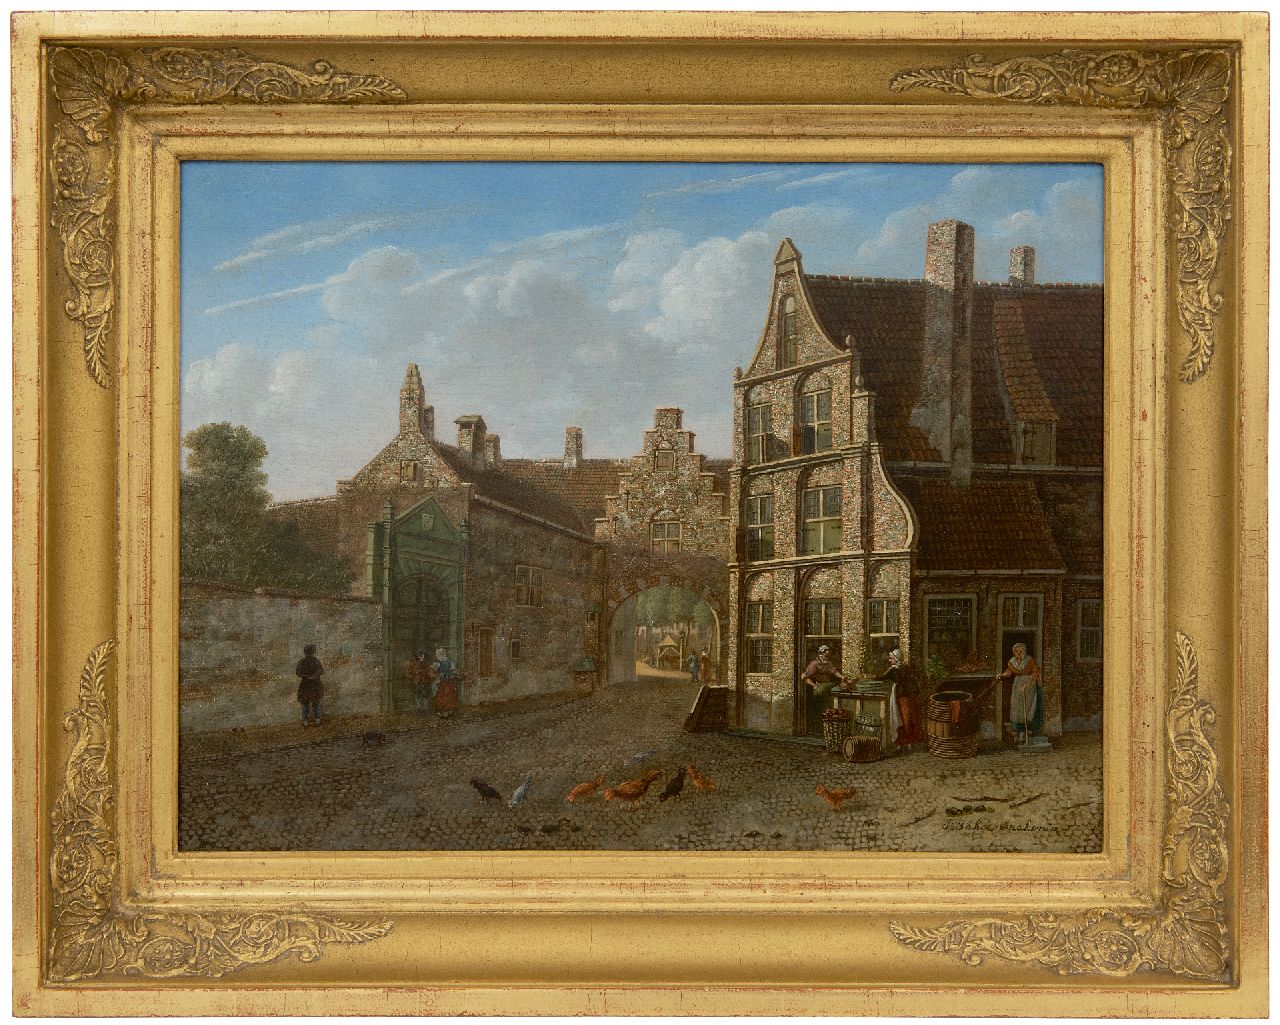 Schoenmaker Pzn J.  | Johannes Schoenmaker Pzn | Paintings offered for sale | A town view with vegetable sellers, oil on panel 31.9 x 42.8 cm, signed l.r.